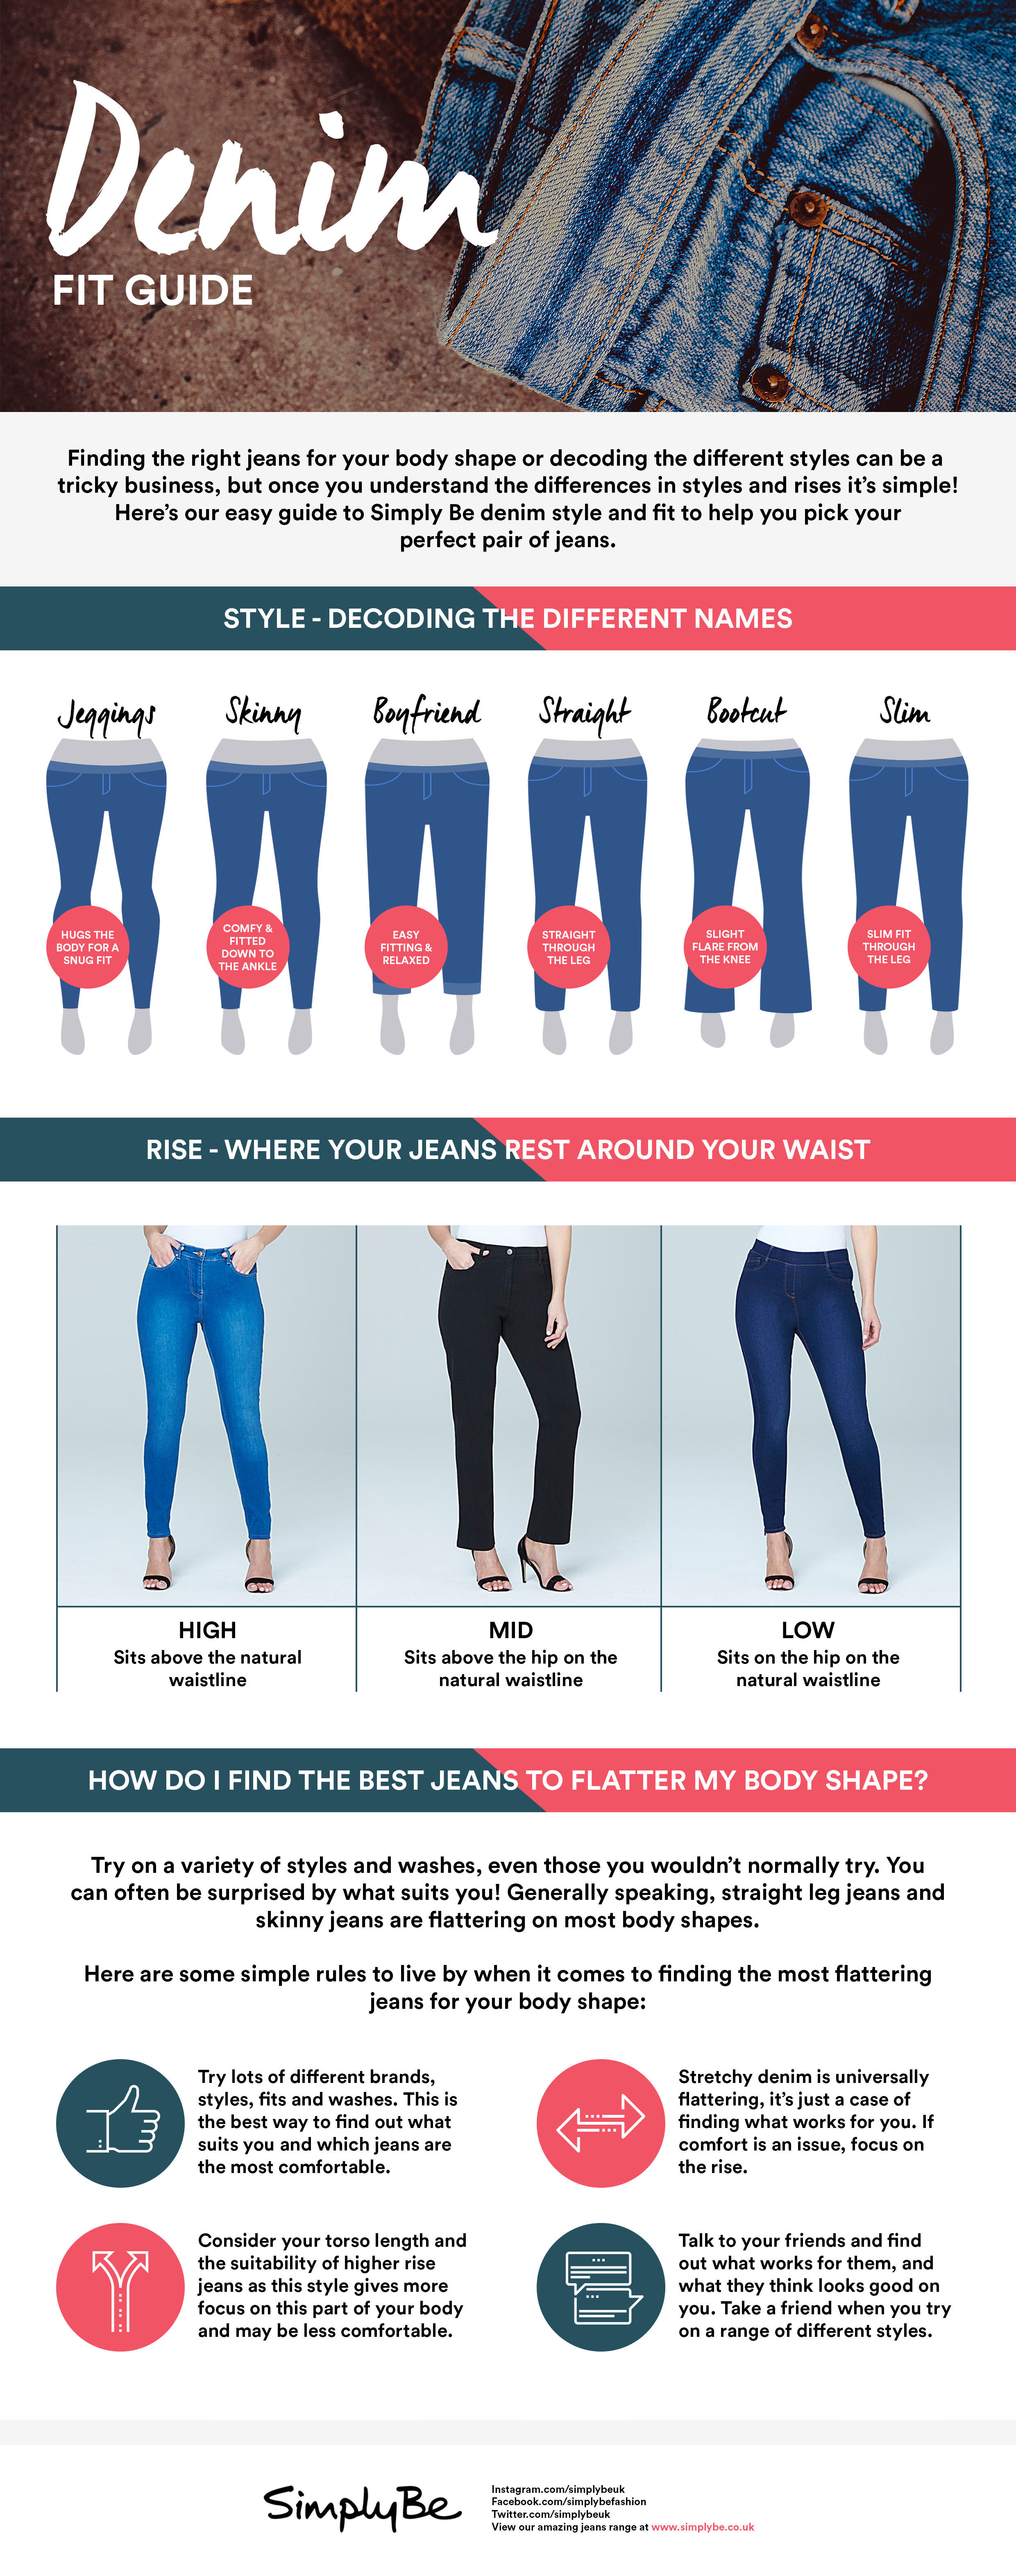 The Denim Fit Guide